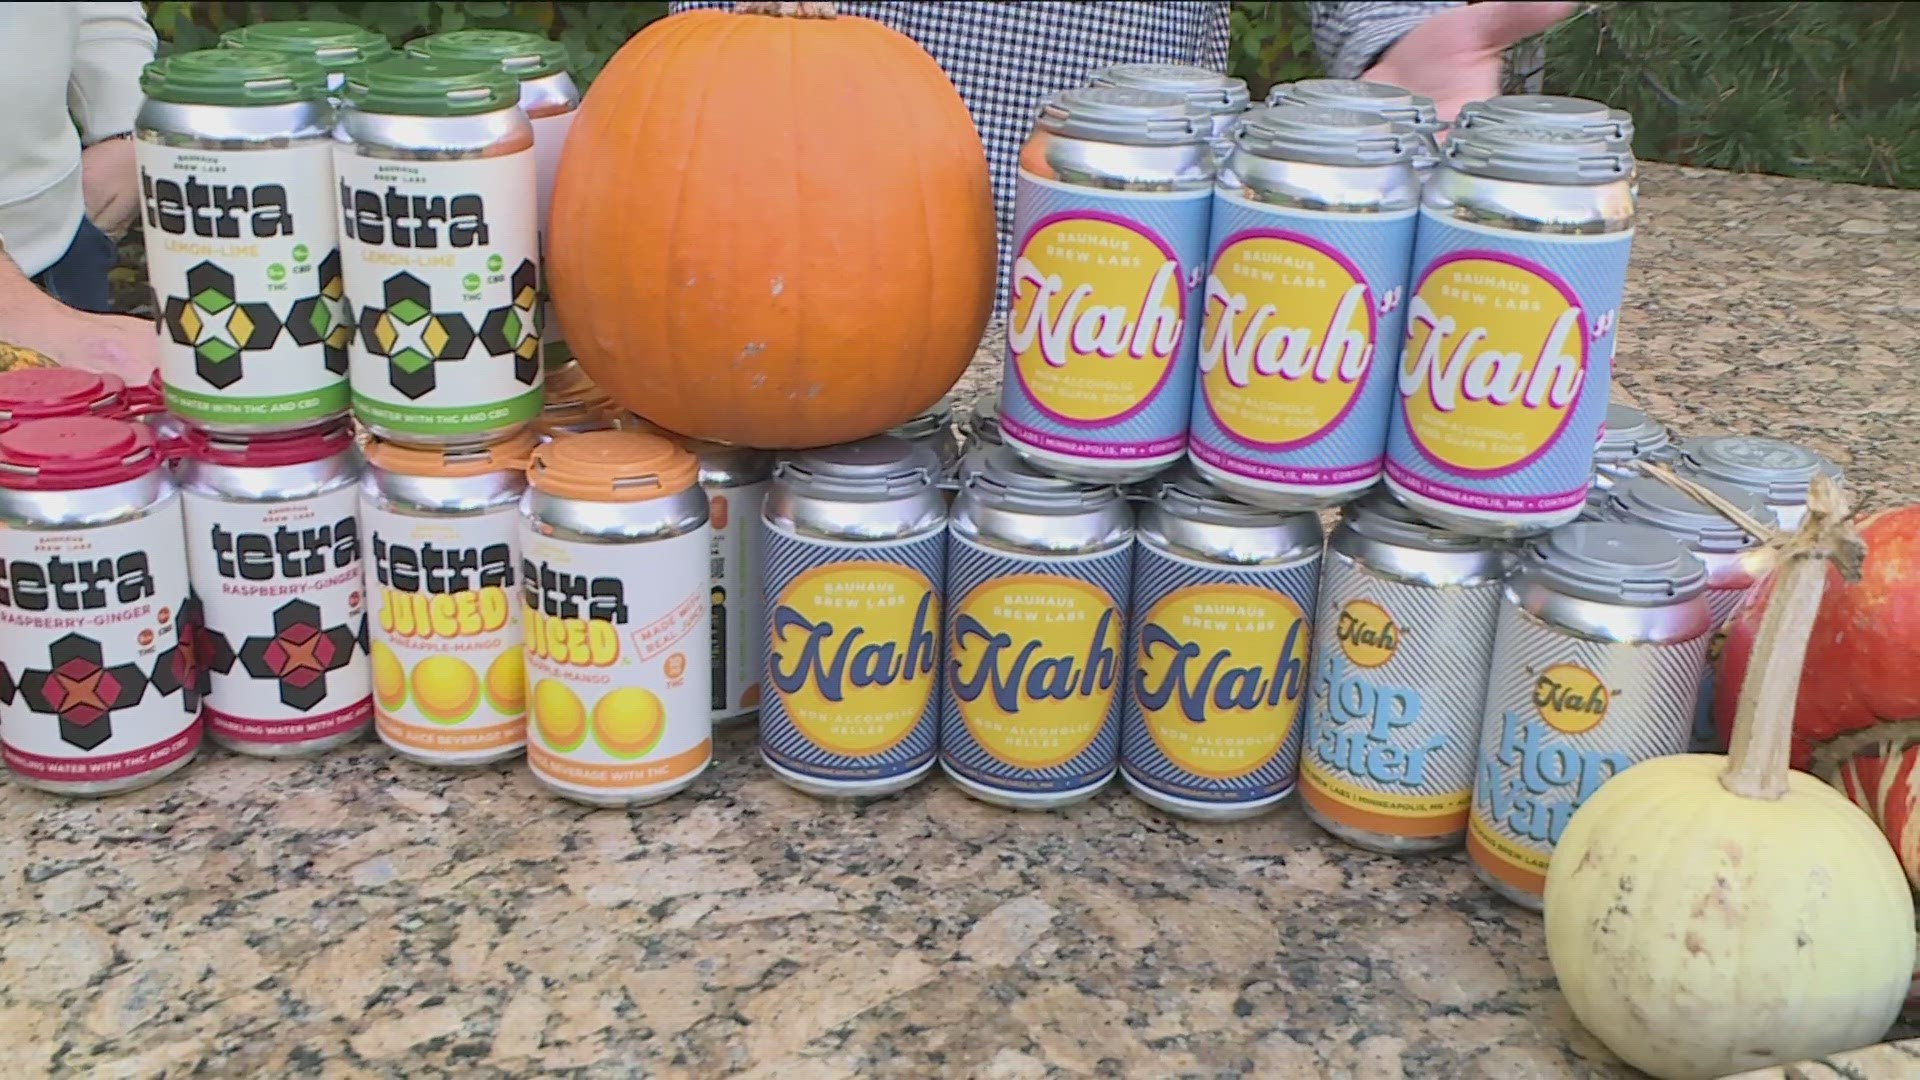 The brewery's owner joined KARE 11 Saturday this week to highlight the brewery's new line of drinks.